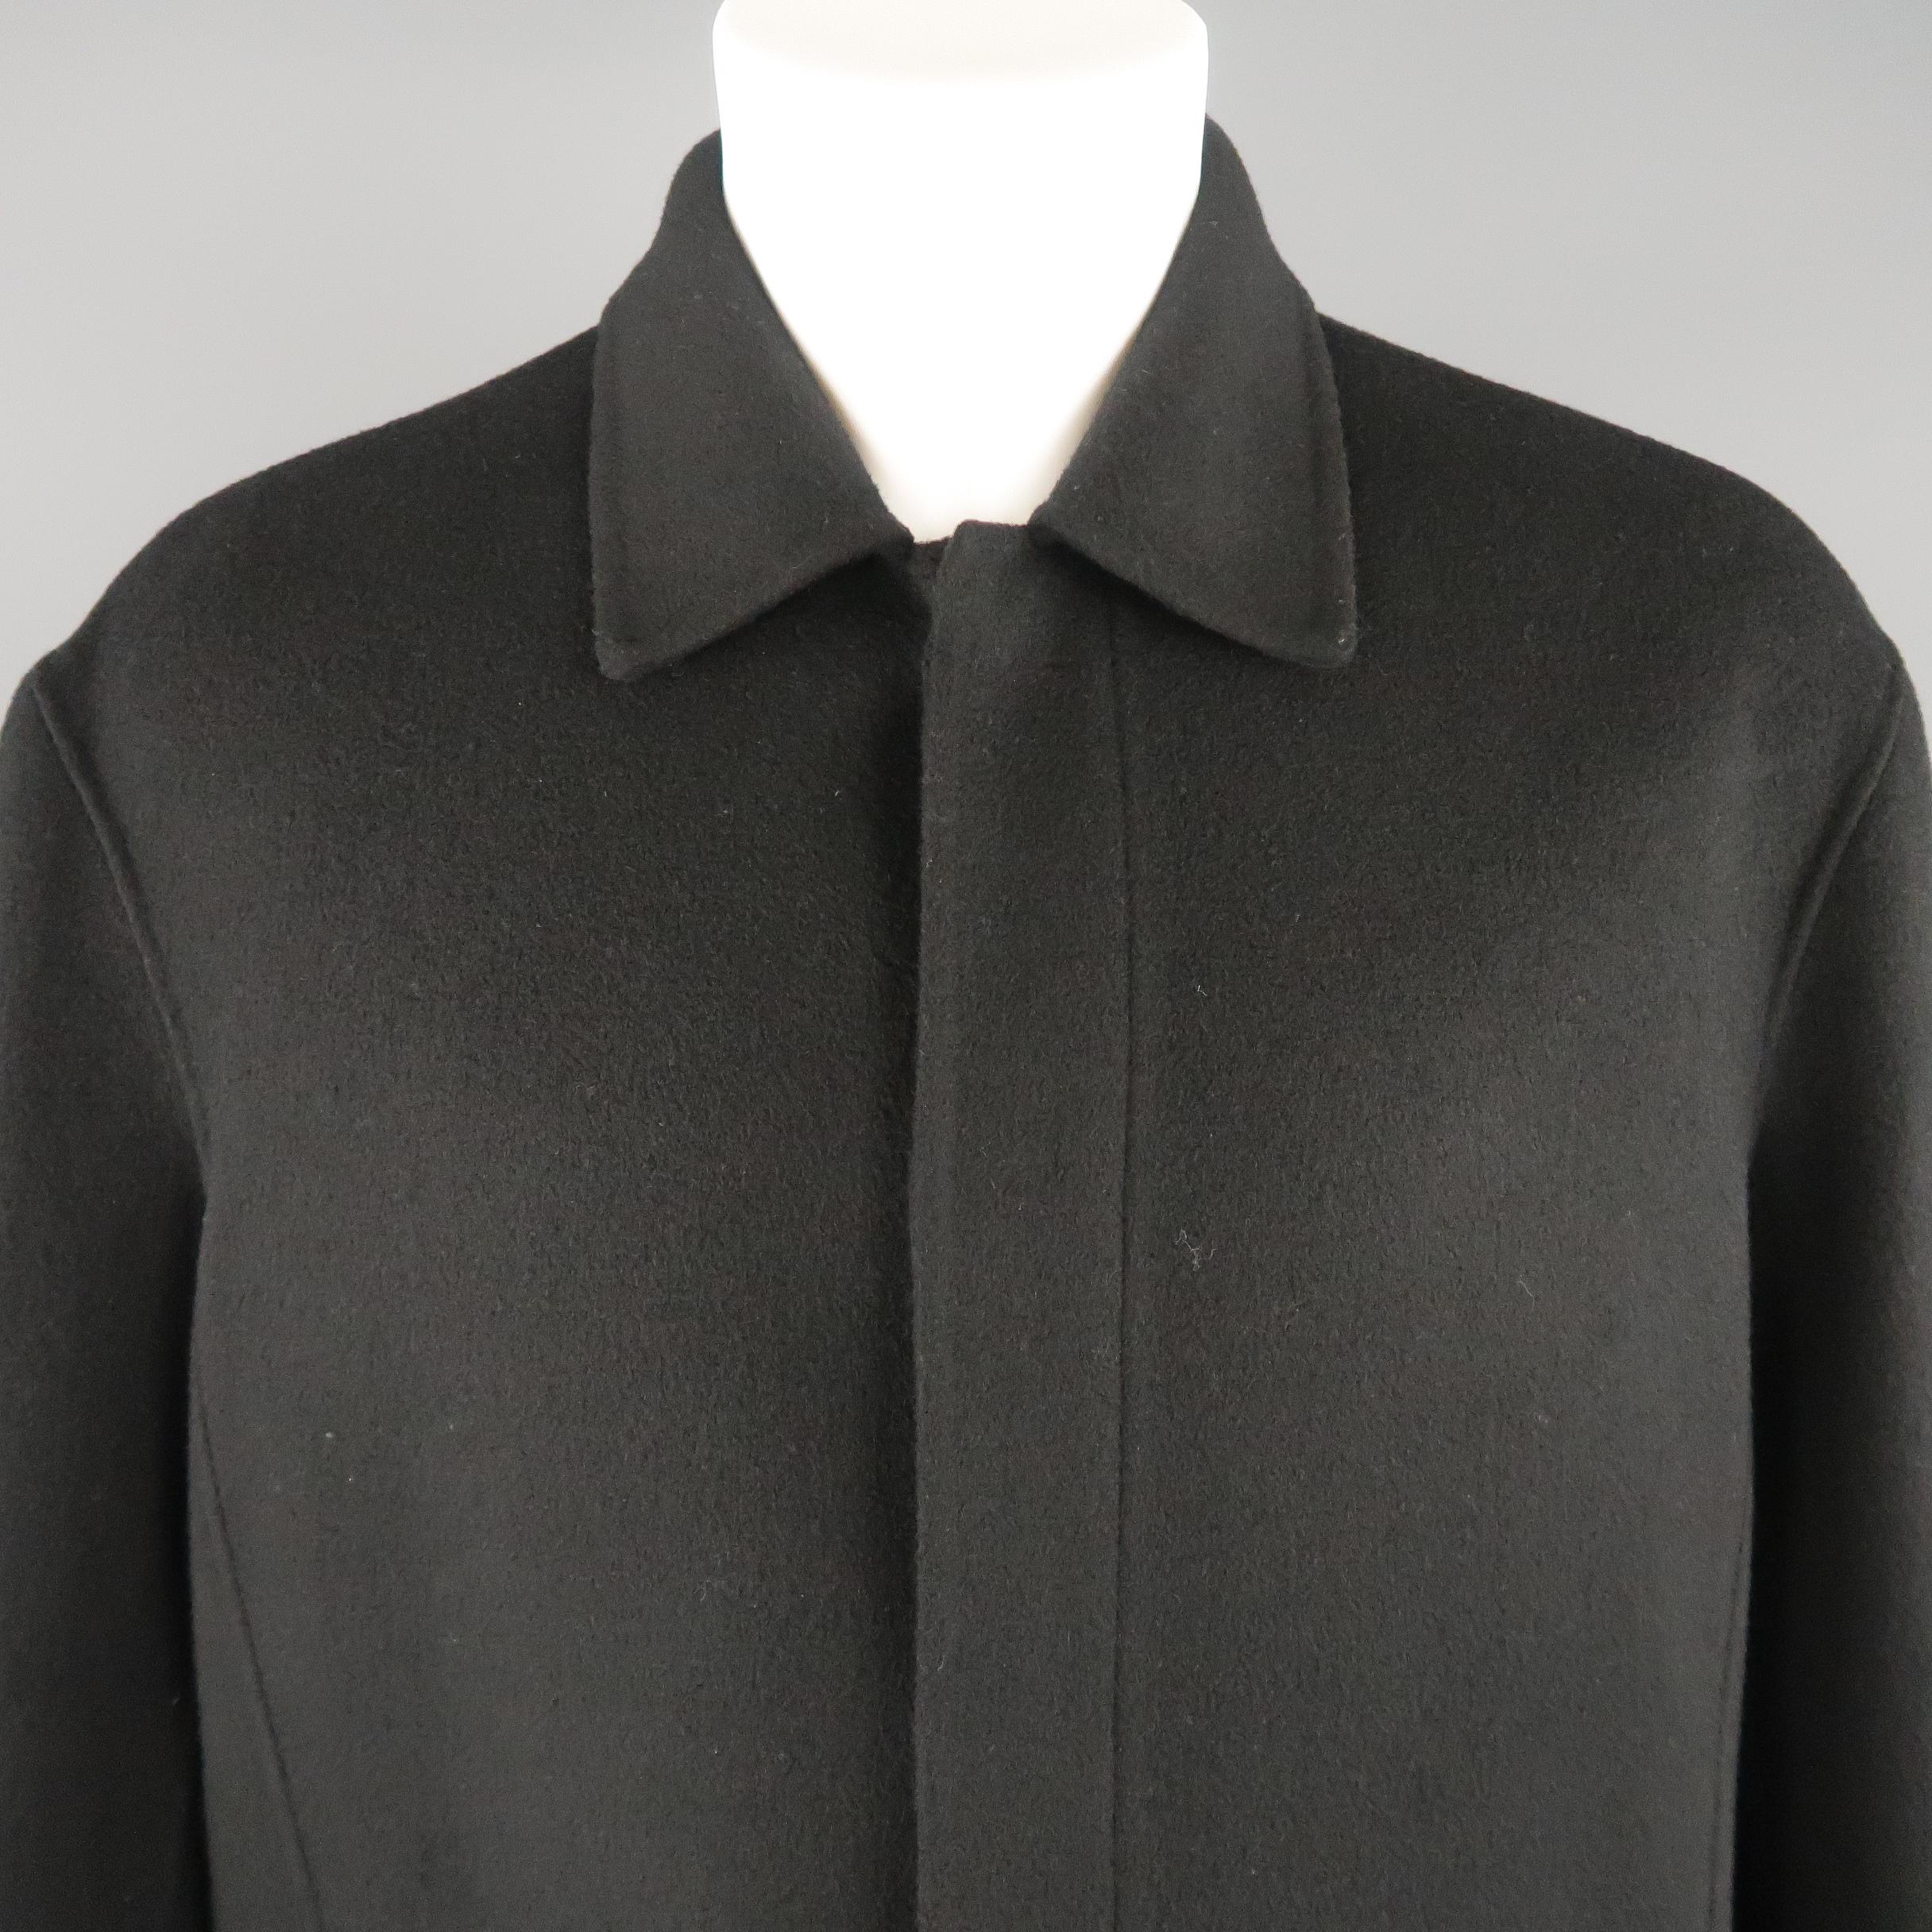 DONNA KARAN car coat comes in double face wool felt with a pointed collar, slit pockets, and hidden placket button up front.
 
Excellent Pre-Owned Condition.
Marked: M
 
Measurements:
 
Shoulder: 21 in.
Chest: 56 in.
Sleeve: 24 in.
Length: 36 in.